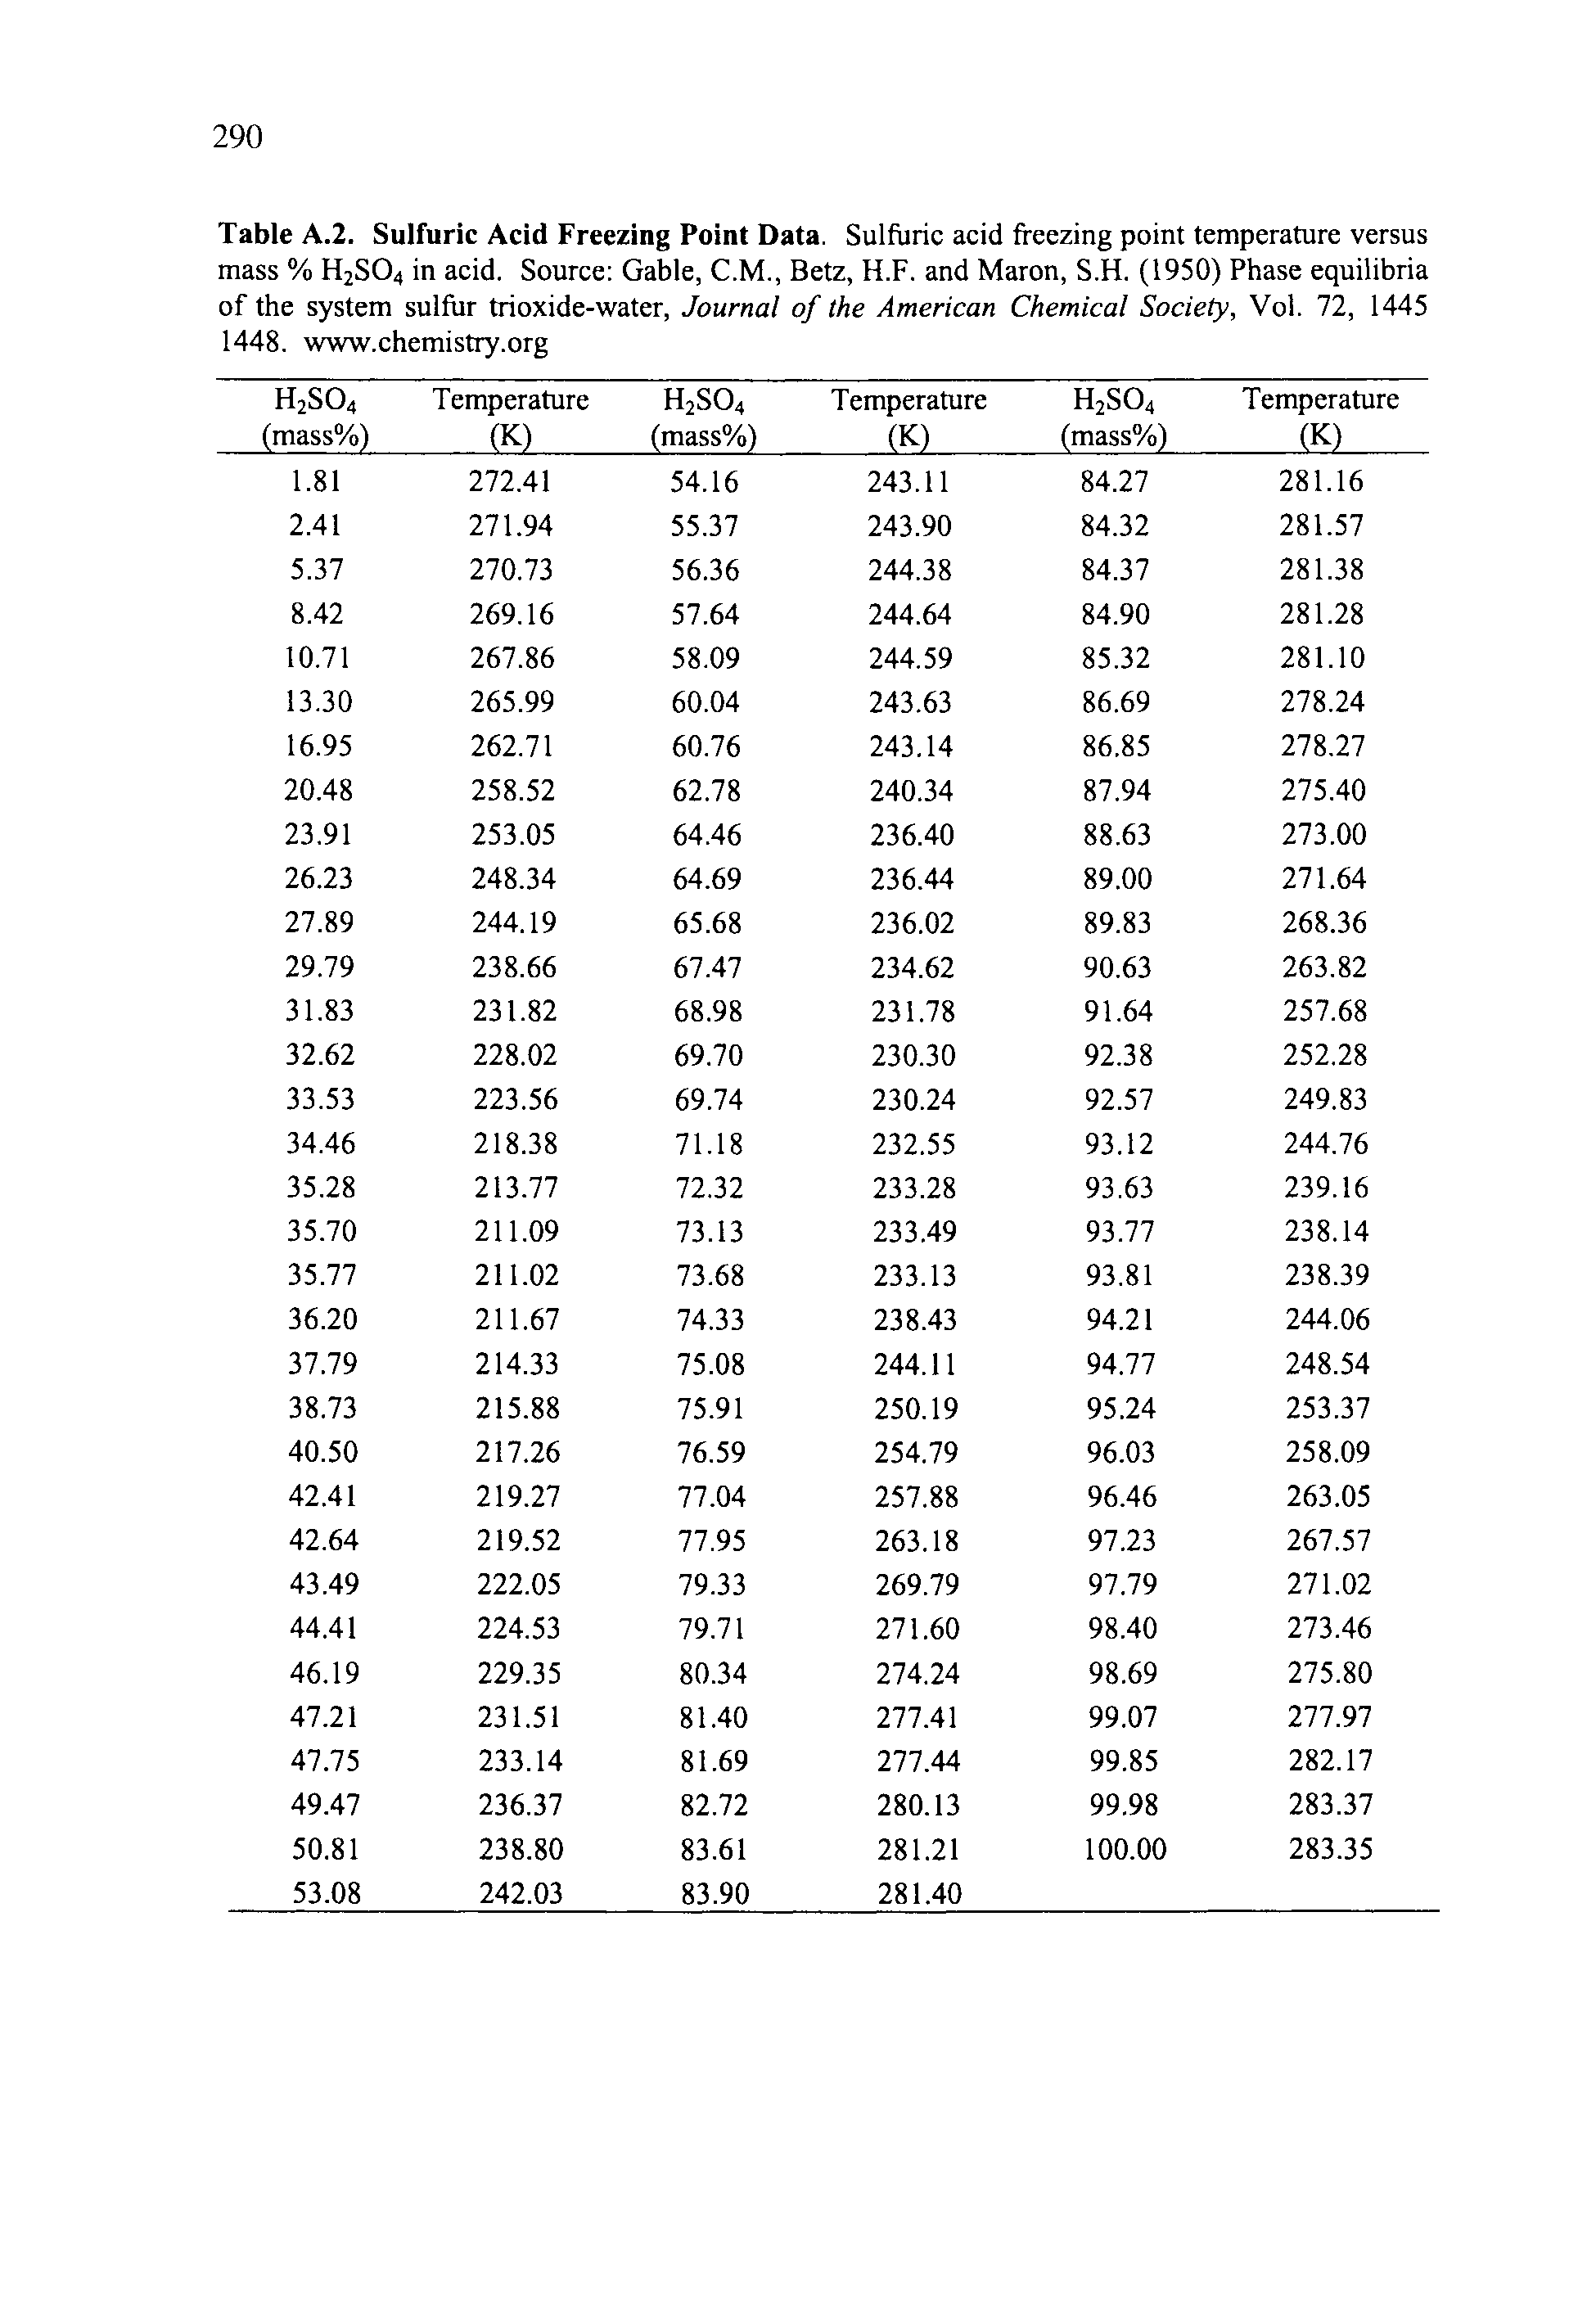 Table A.2. Sulfuric Acid Freezing Point Data. Sulfuric acid freezing point temperature versus mass % H2S04 in acid. Source Gable, C.M., Betz, H.F. and Maron, S.H. (1950) Phase equilibria of the system sulfur trioxide-water, Journal of the American Chemical Society, Vol. 72, 1445 1448. www.chemistry.org...